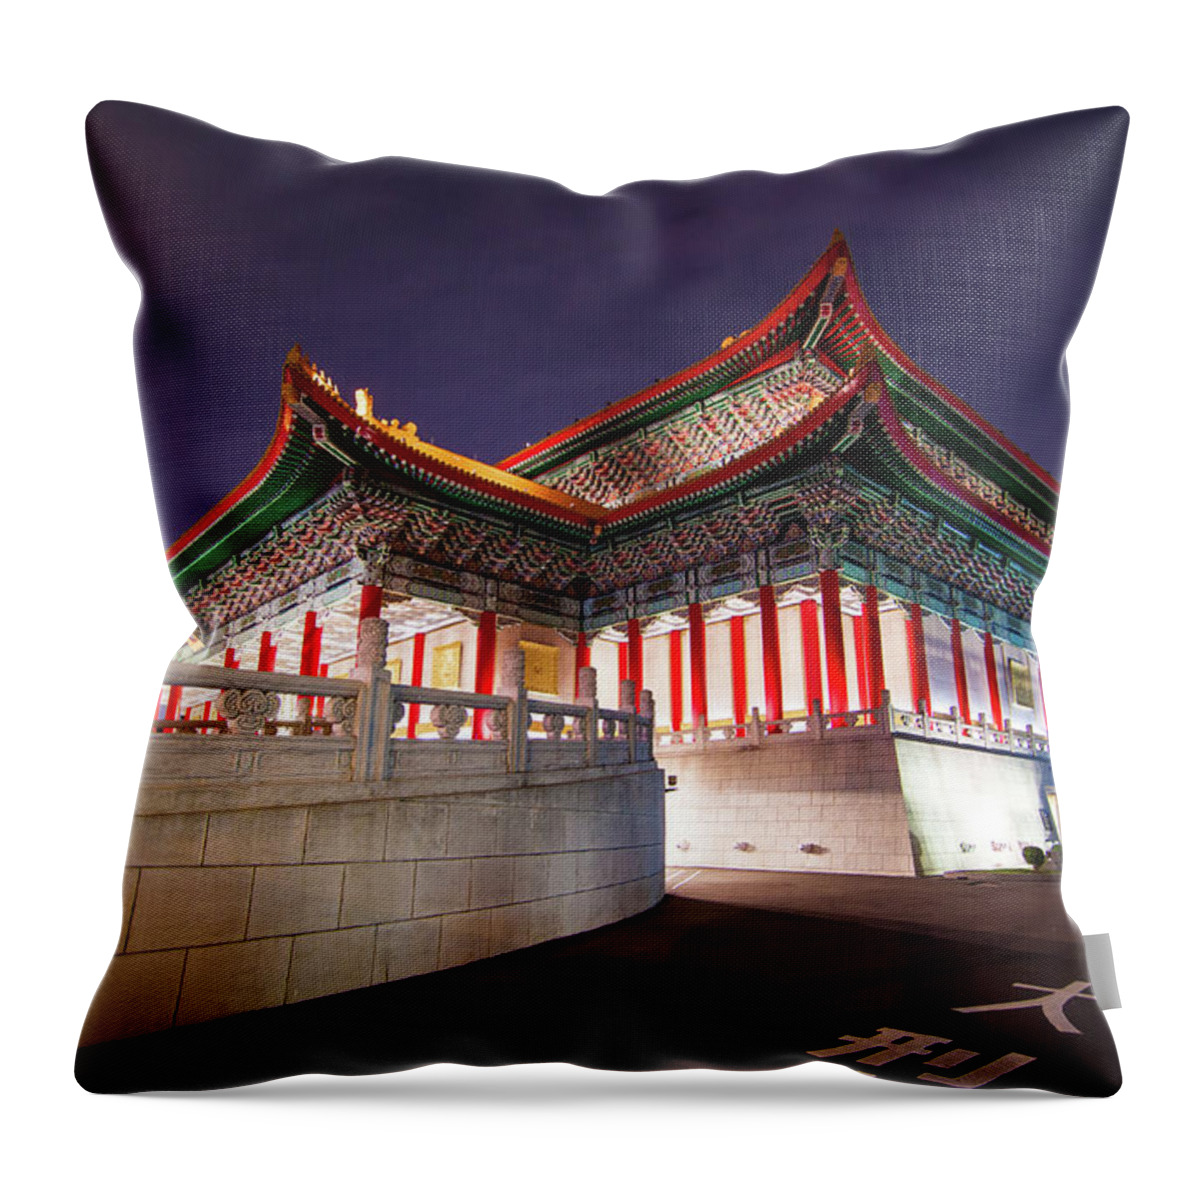 Taiwan Throw Pillow featuring the photograph Taiwan National Theater Hall by Cheng-lun Chung